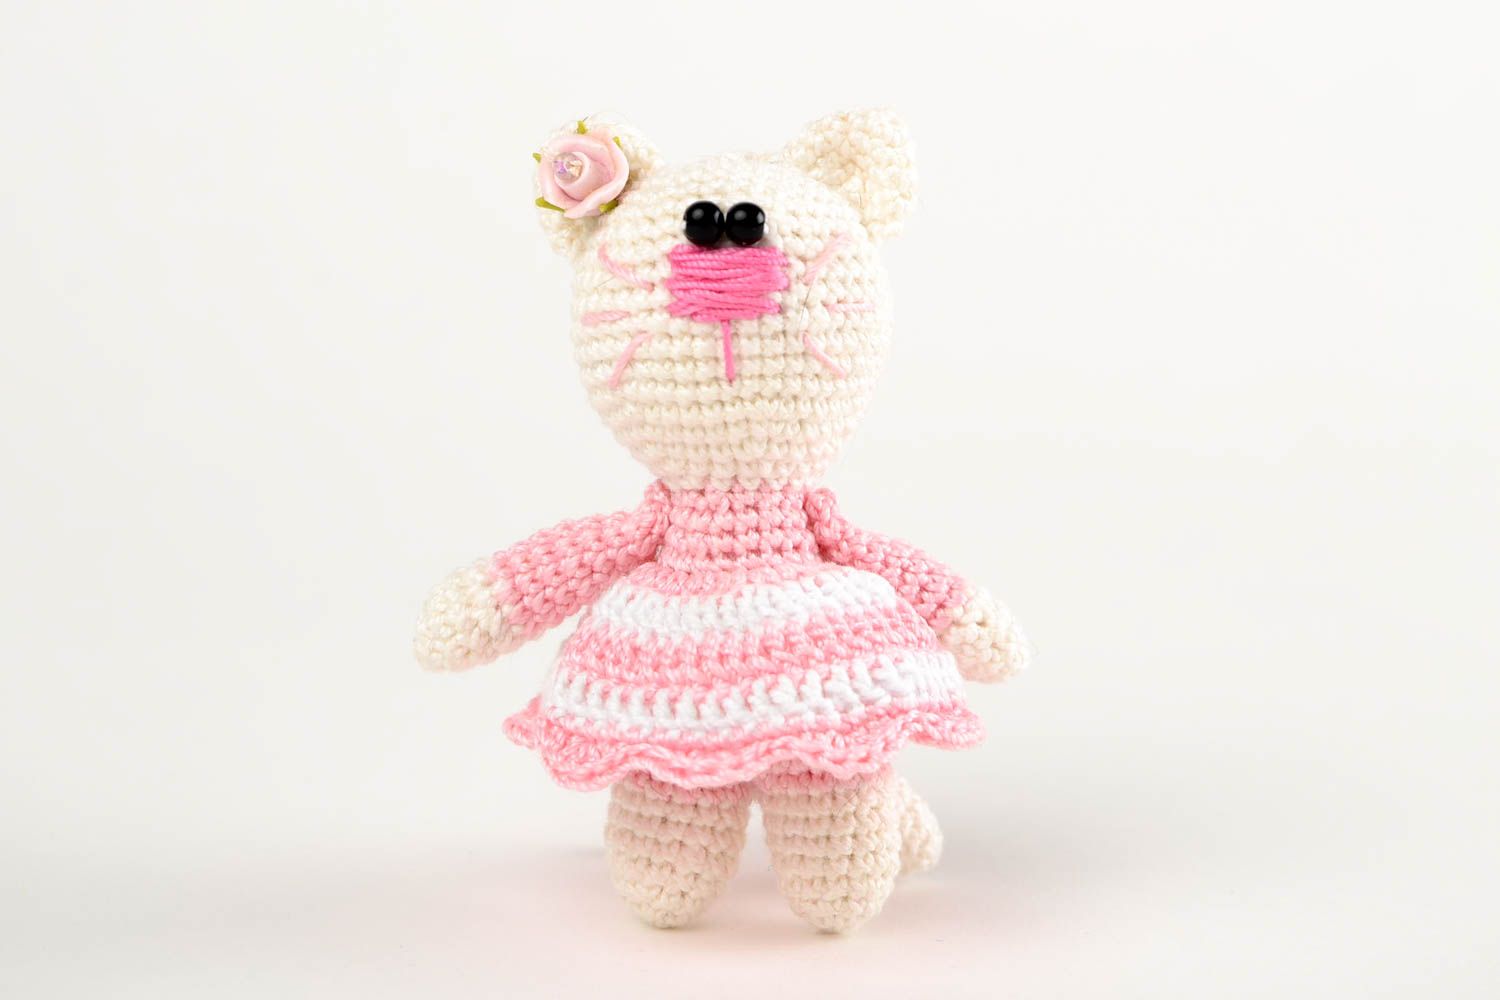 Handmade crocheted toy designer toy unusual toy for kids collectible toy photo 4